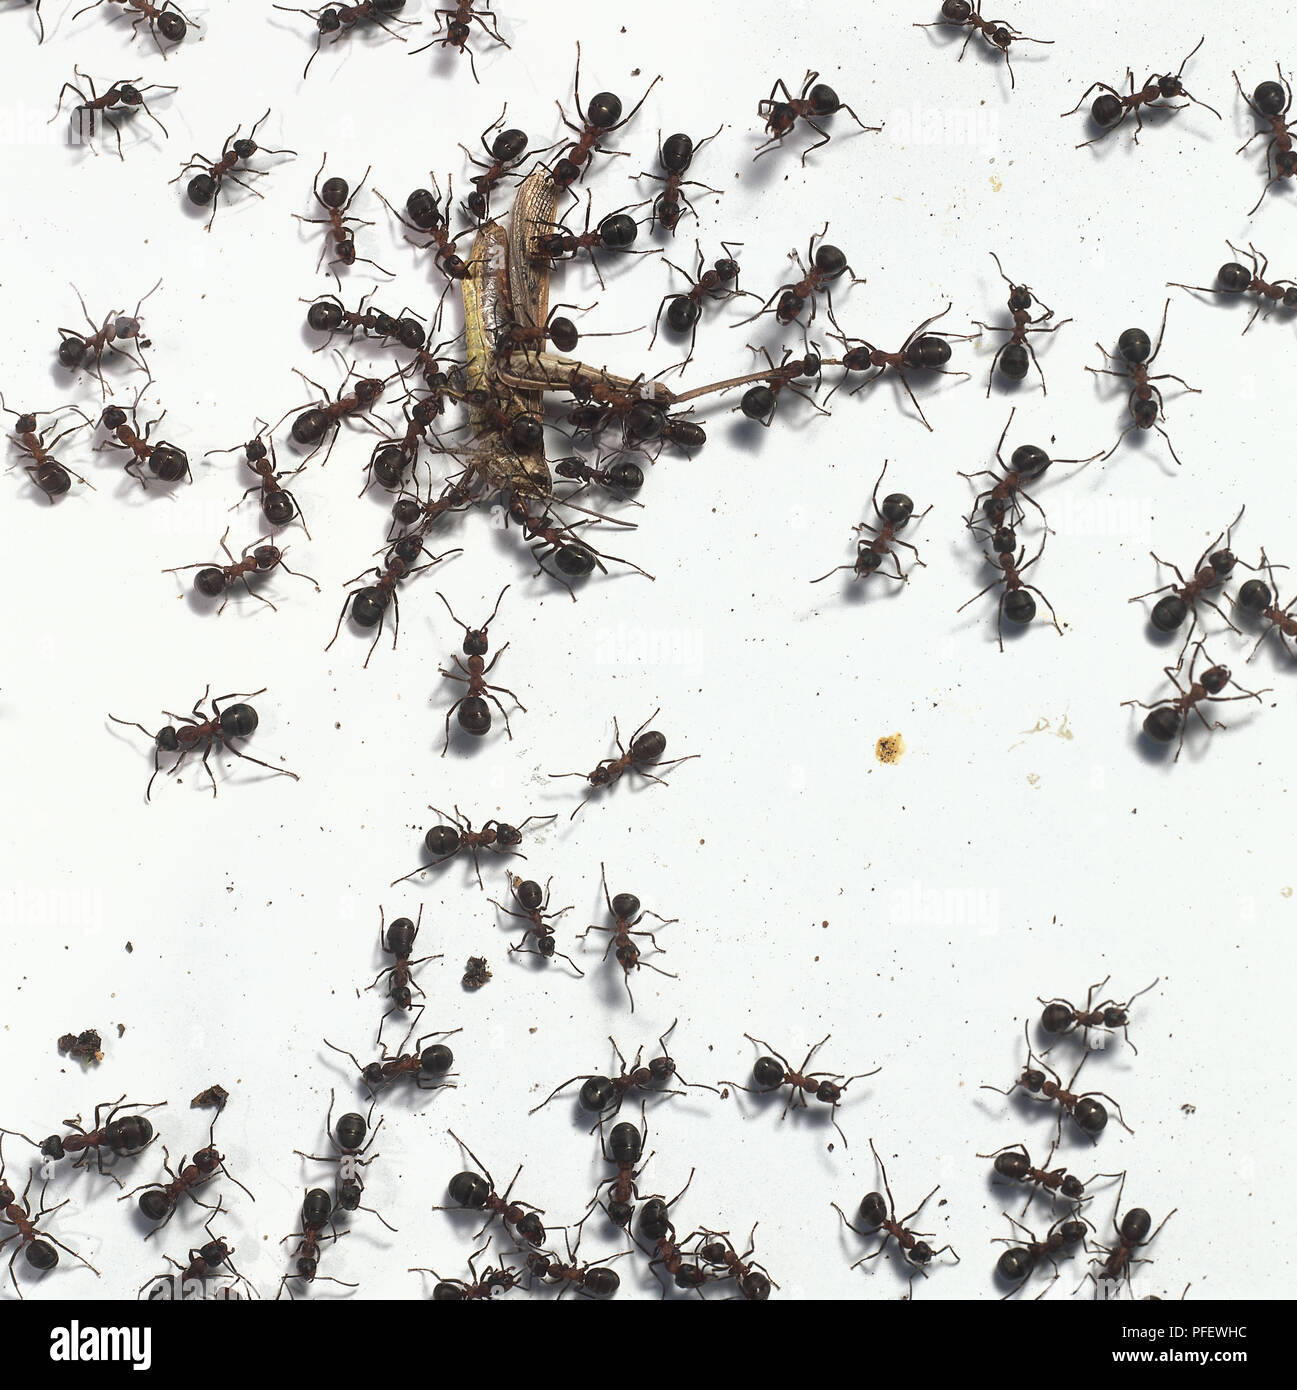 Wood ants, Formica rufa, swarming over and around a dead grasshopper, intending to break it up and carry it back to the nest, above view. Stock Photo